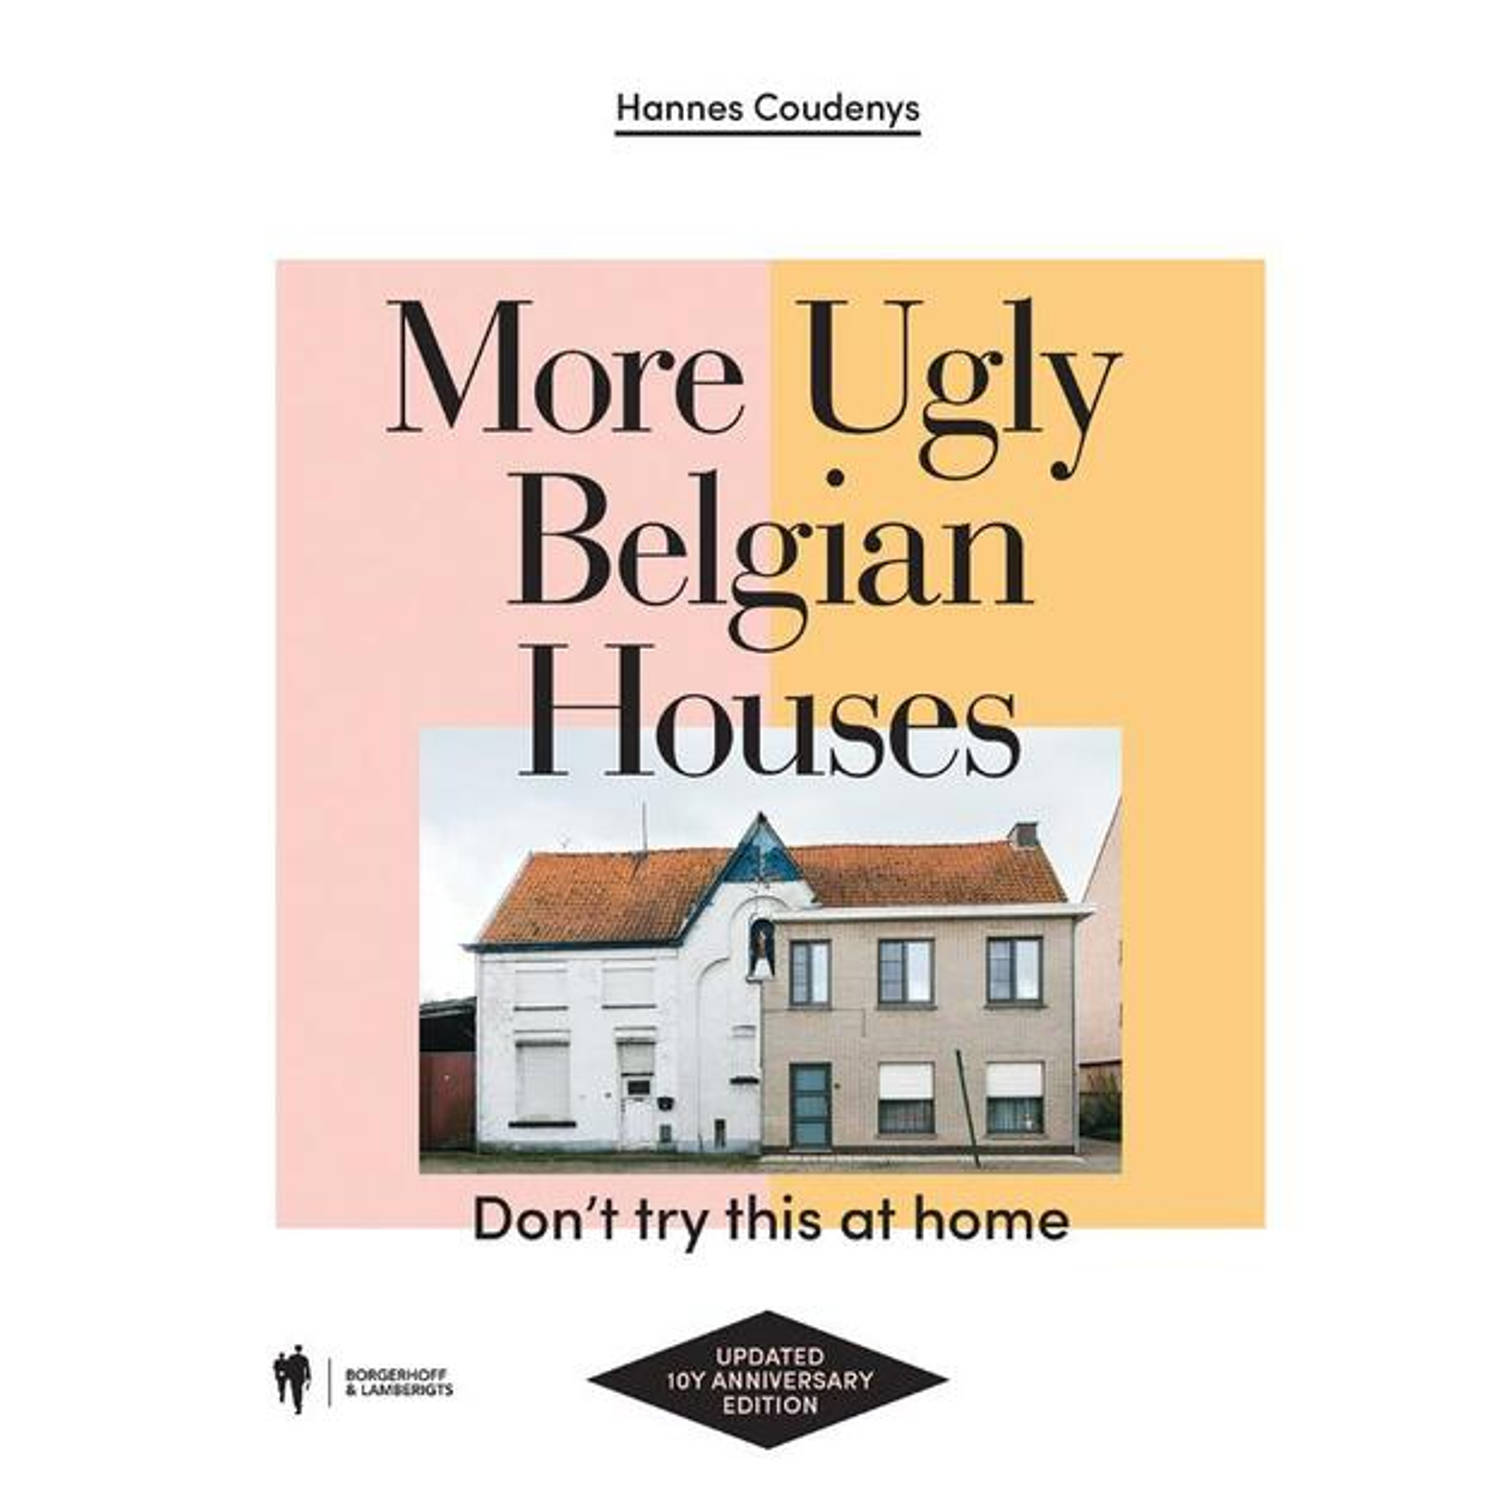 More Ugly Belgian Houses. Hannes Coudenys, Hardcover